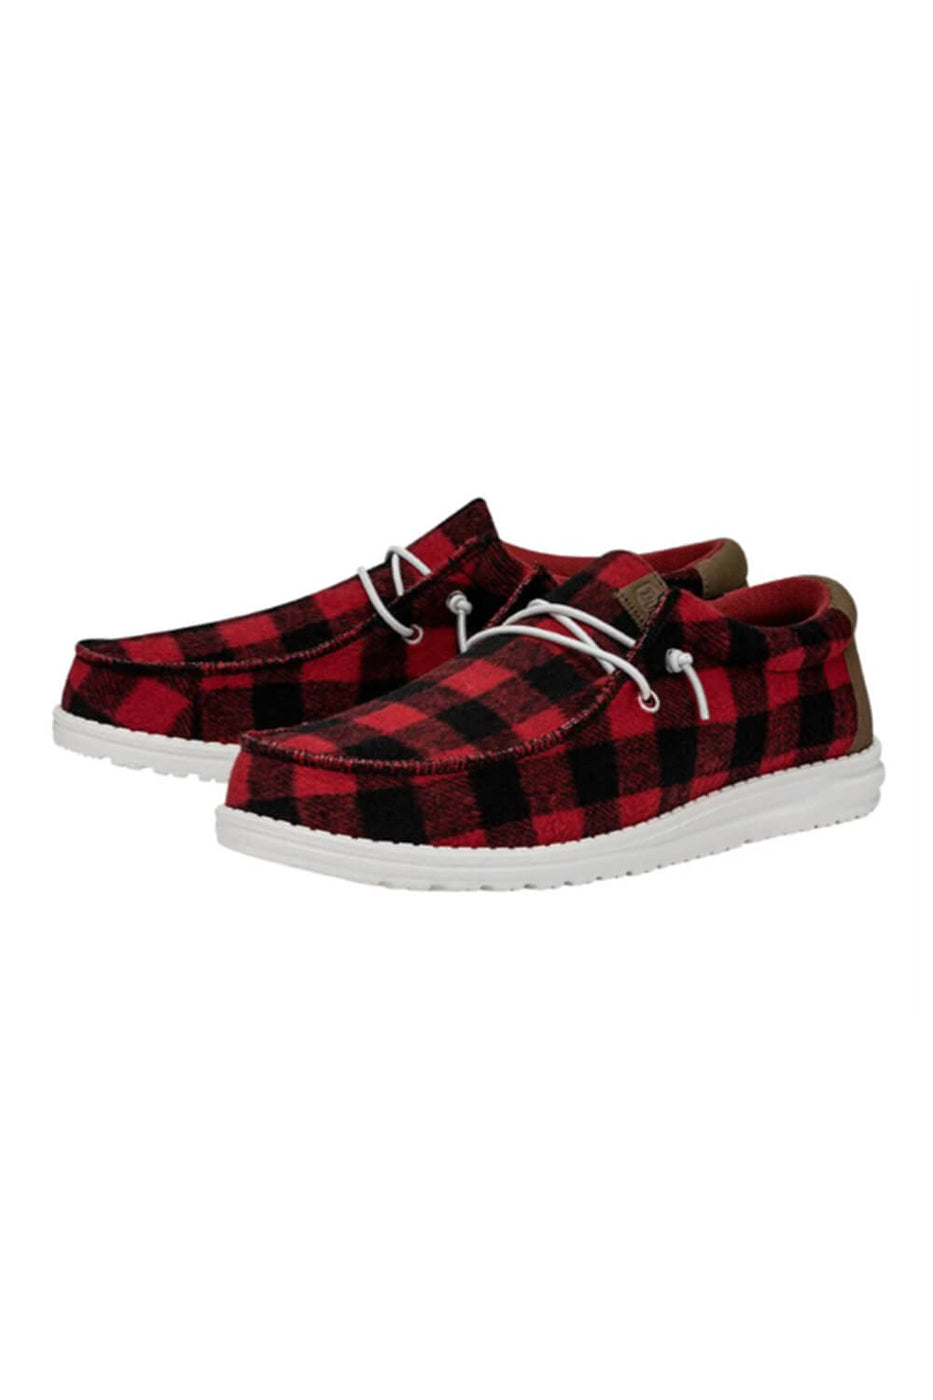 HEYDUDE Men's Wally Buffalo Plaid Shoes in Red